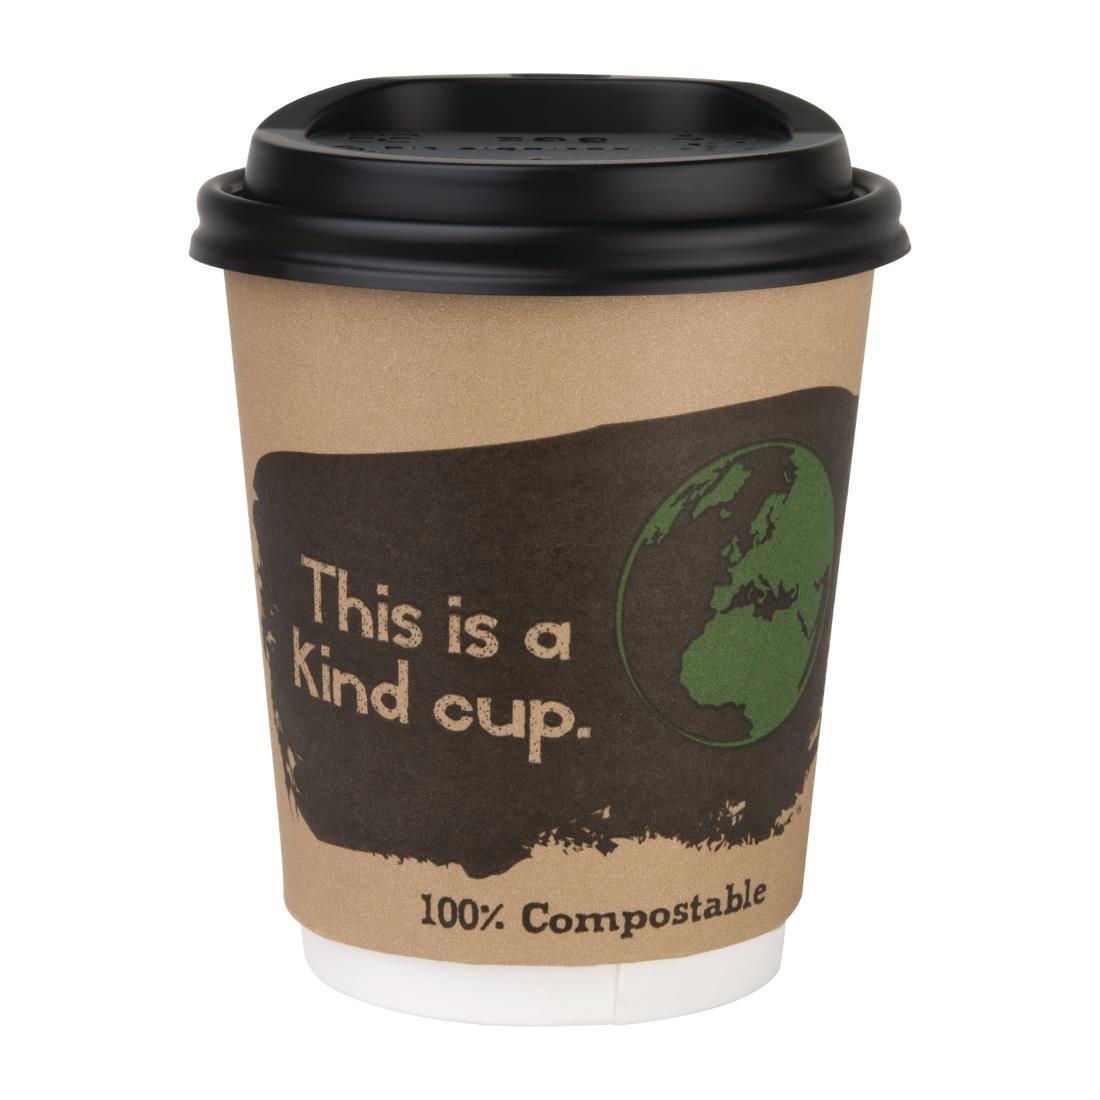 Fiesta Compostable Coffee Cup Lids 225ml / 8oz (Pack of 50) - DS054  - 3